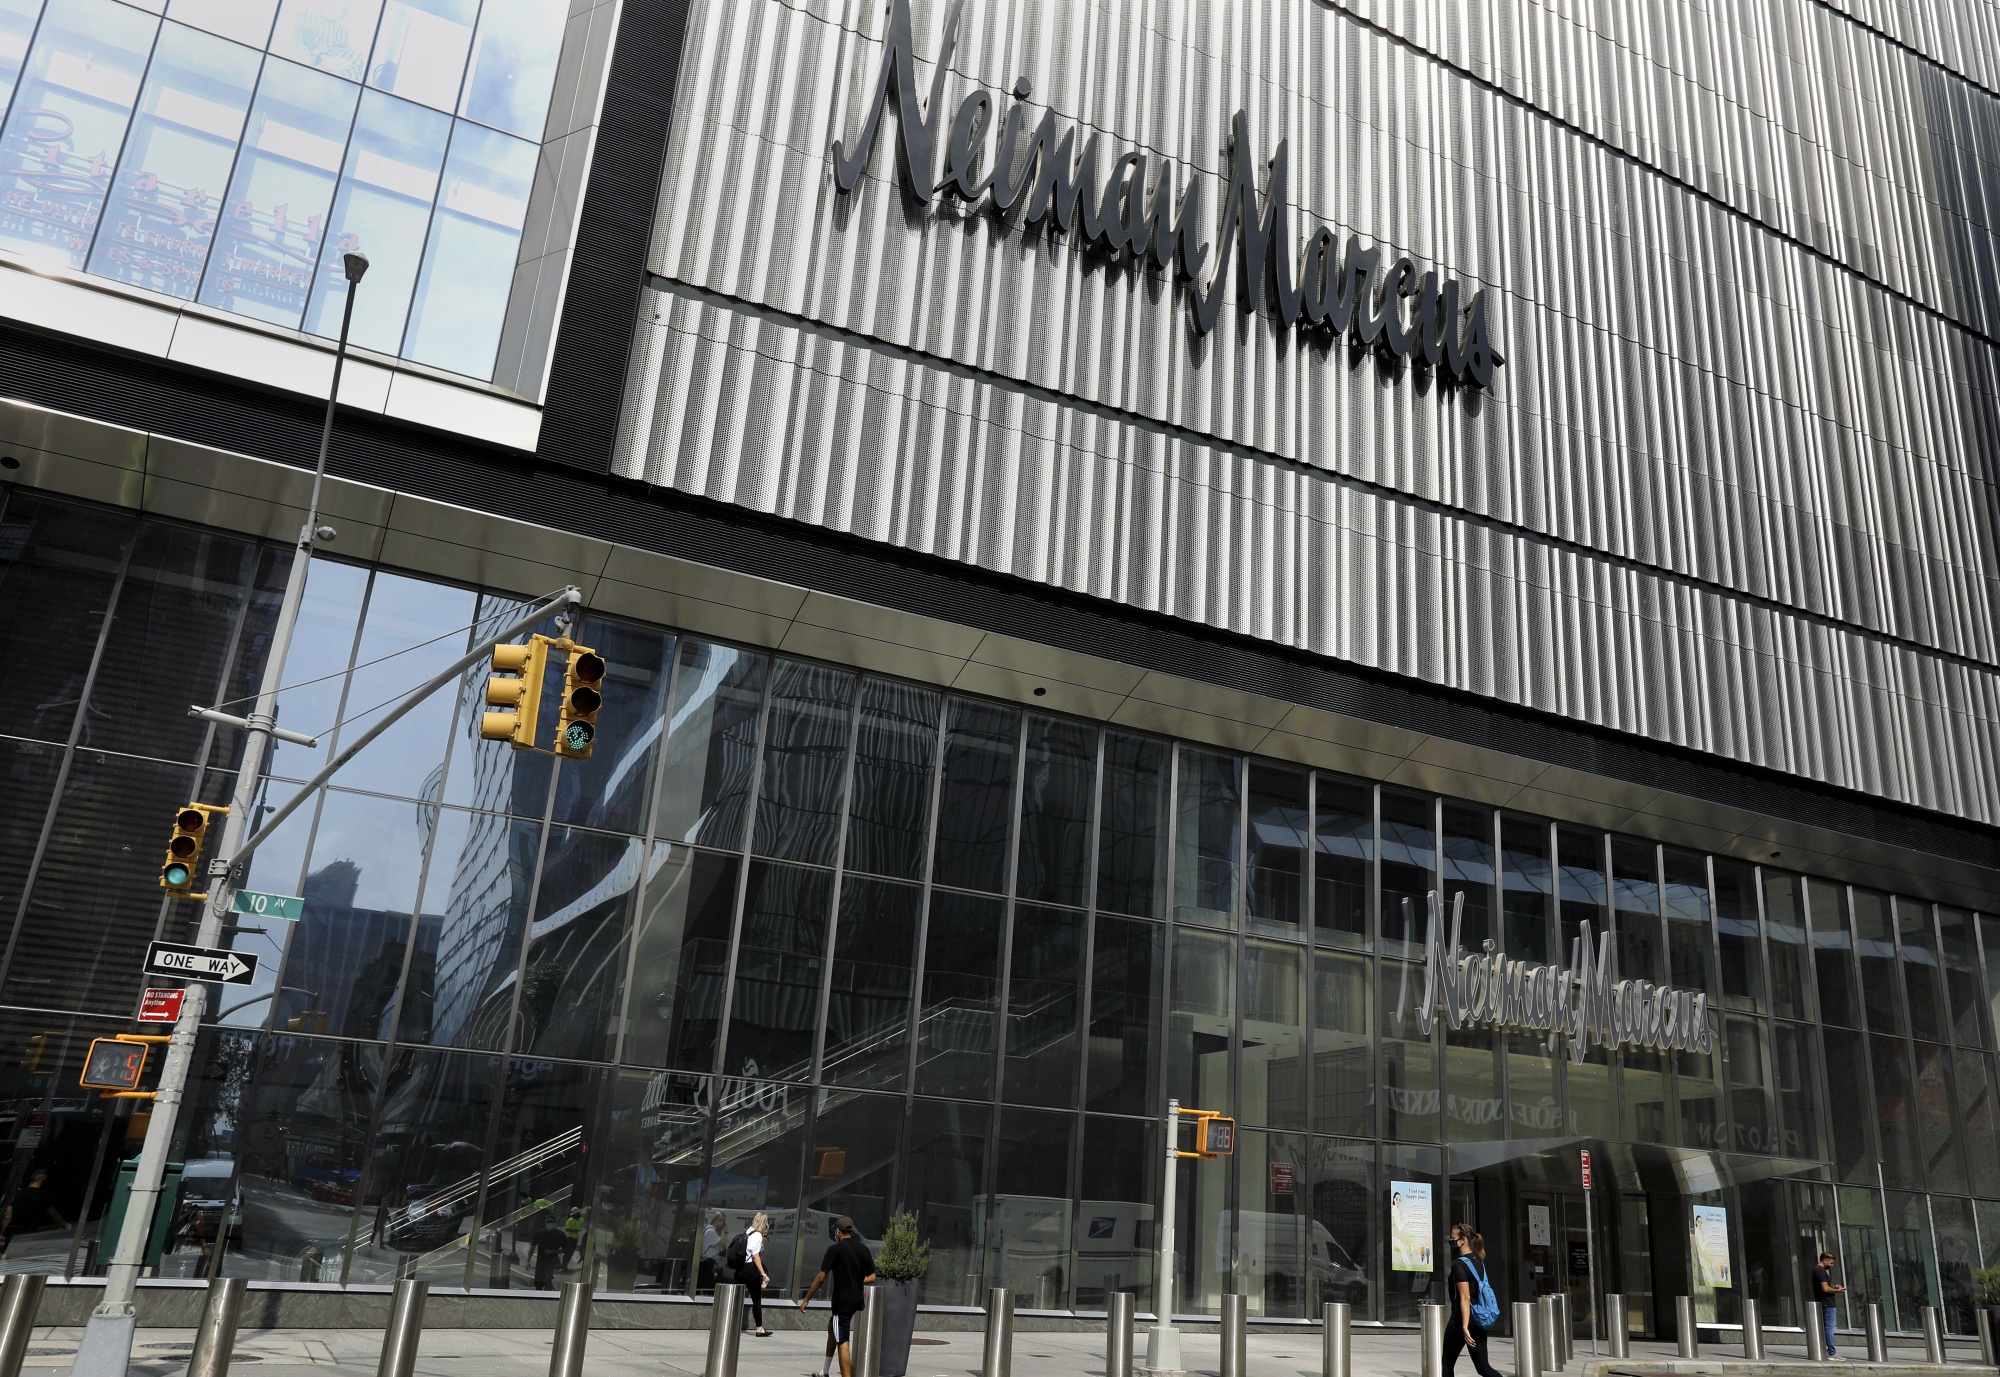 Neiman Marcus Hudson Yards - CLOSED in New York, NY